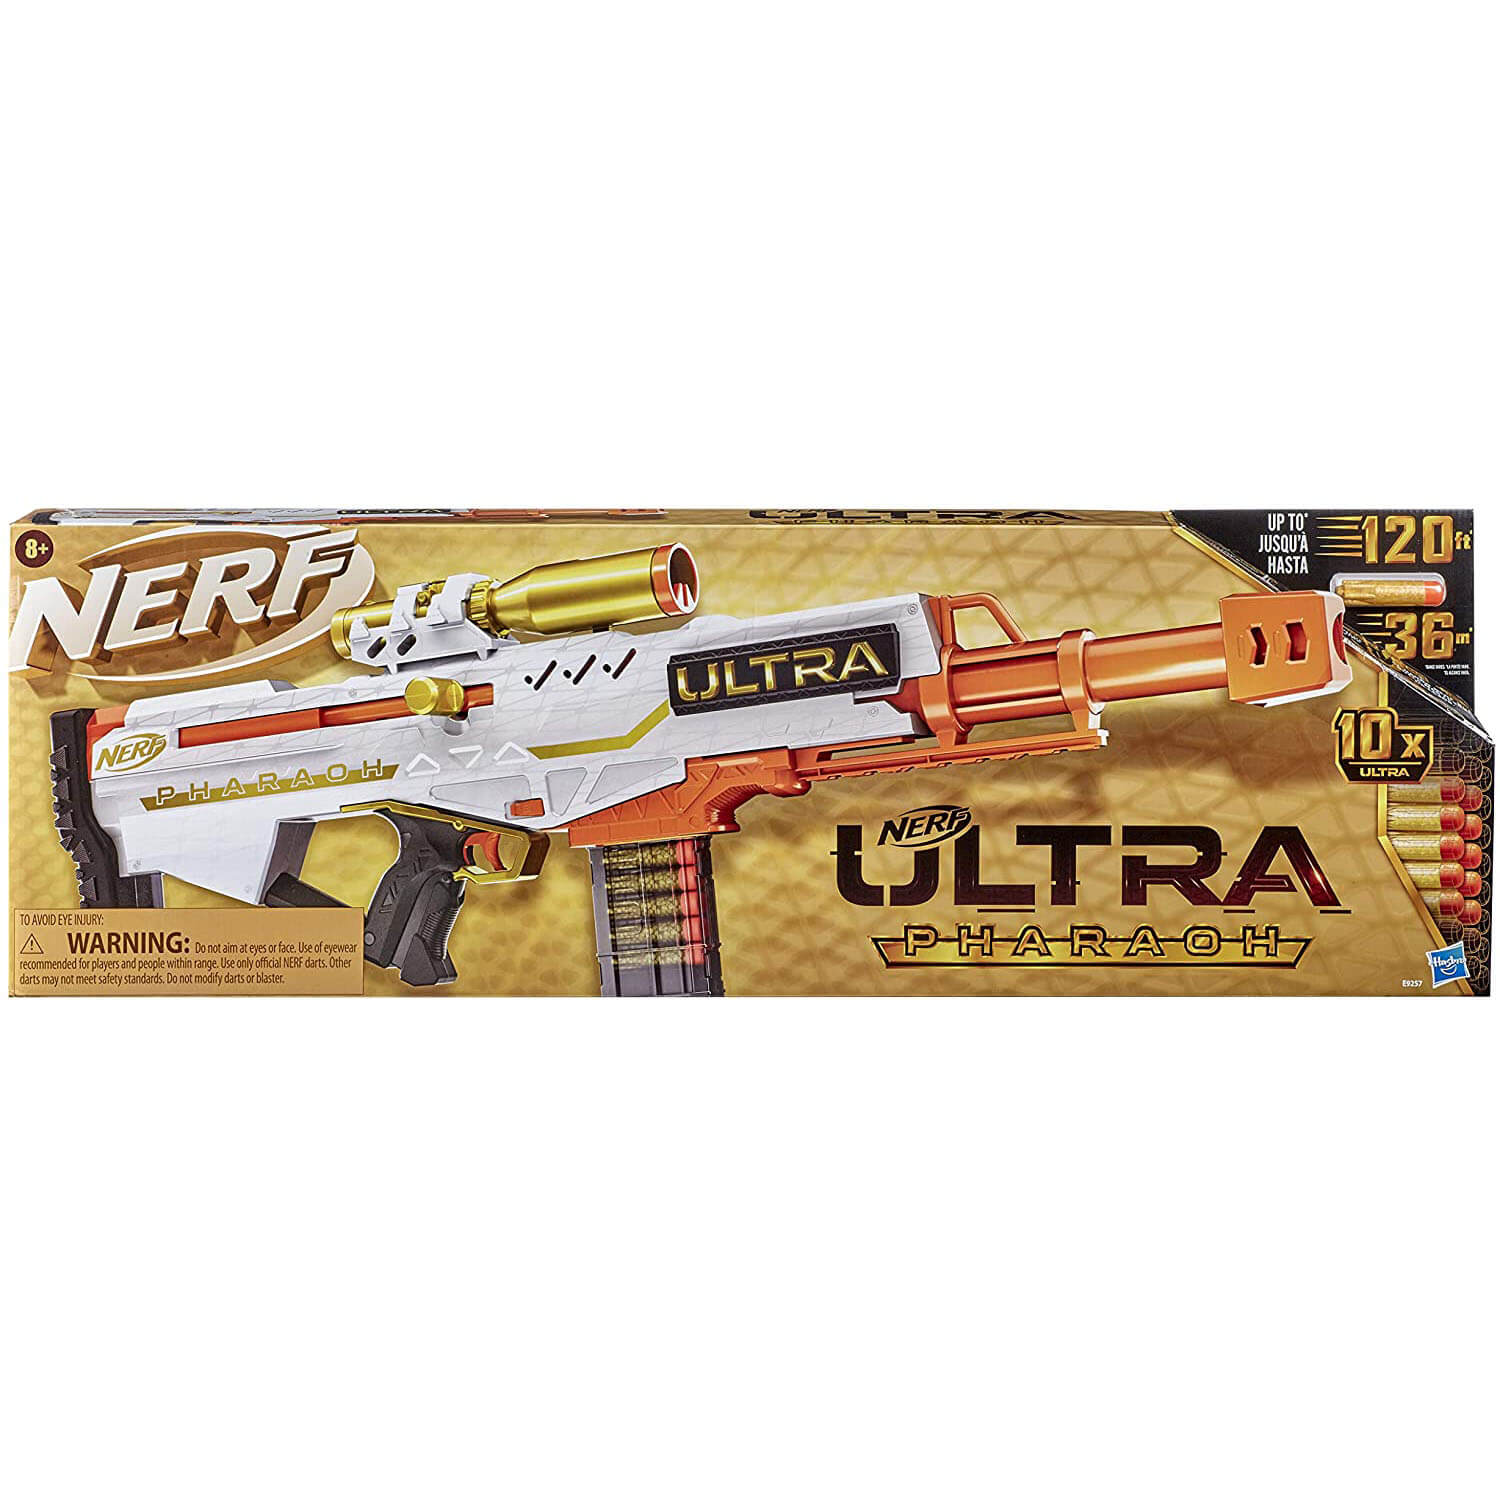 NERF Ultra Pharaoh Blaster with Premium Gold Accents